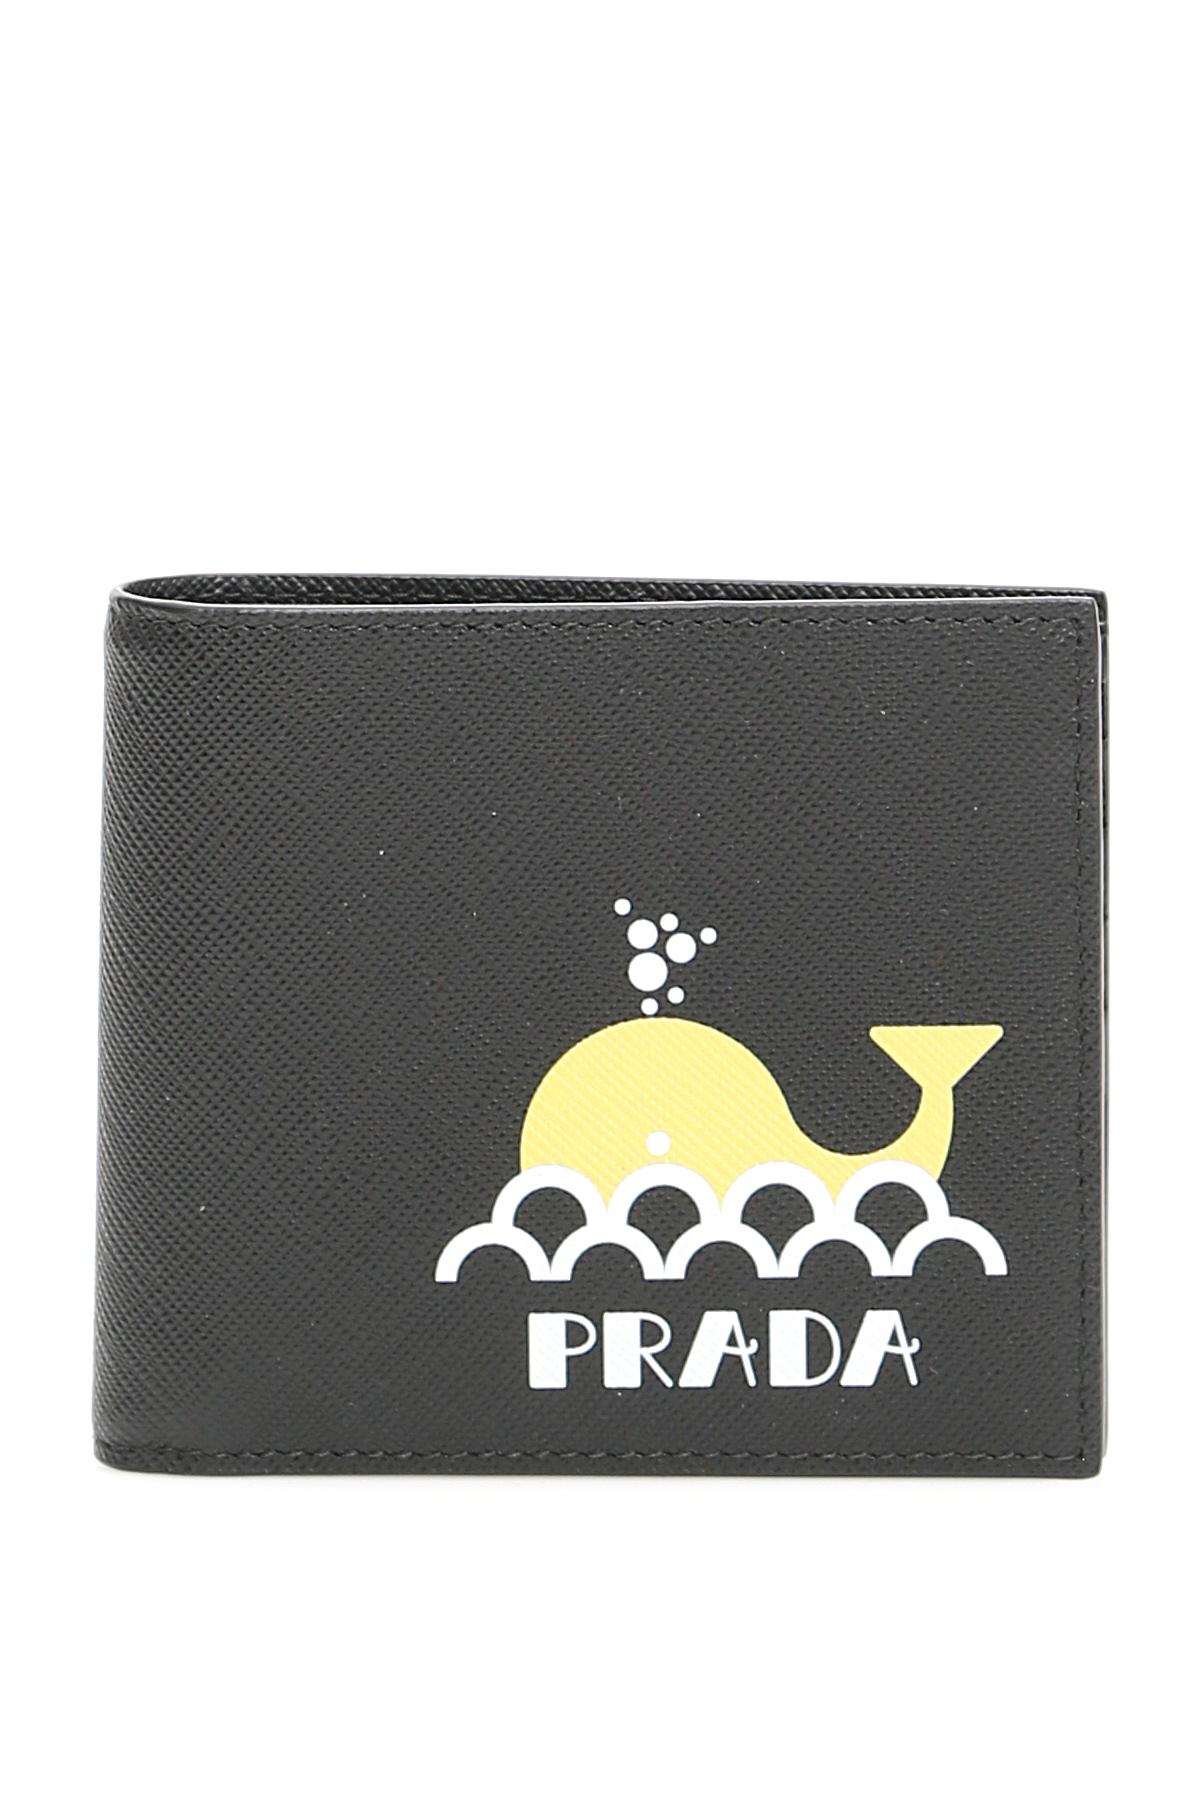 Prada Leather Whale Print Wallet in 